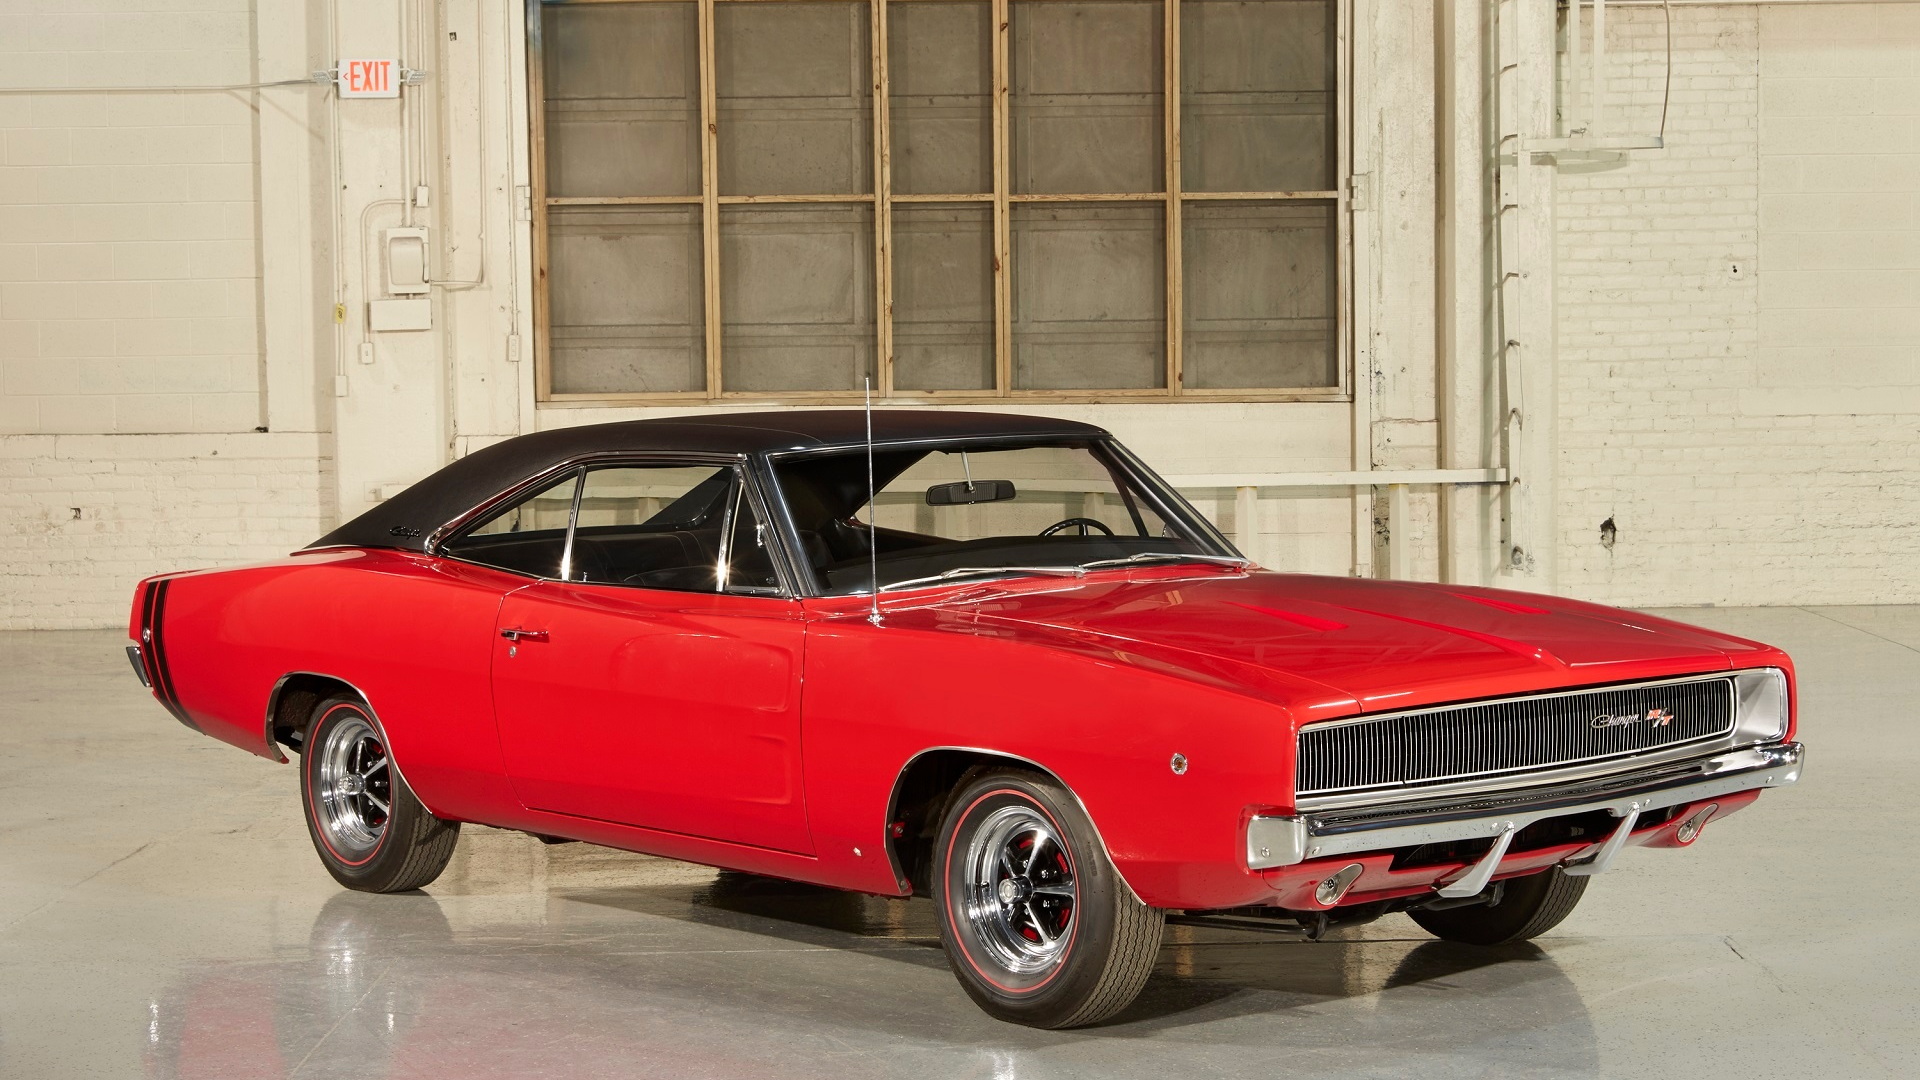 1968 Dodge Charger, Dodge Heritage Collection